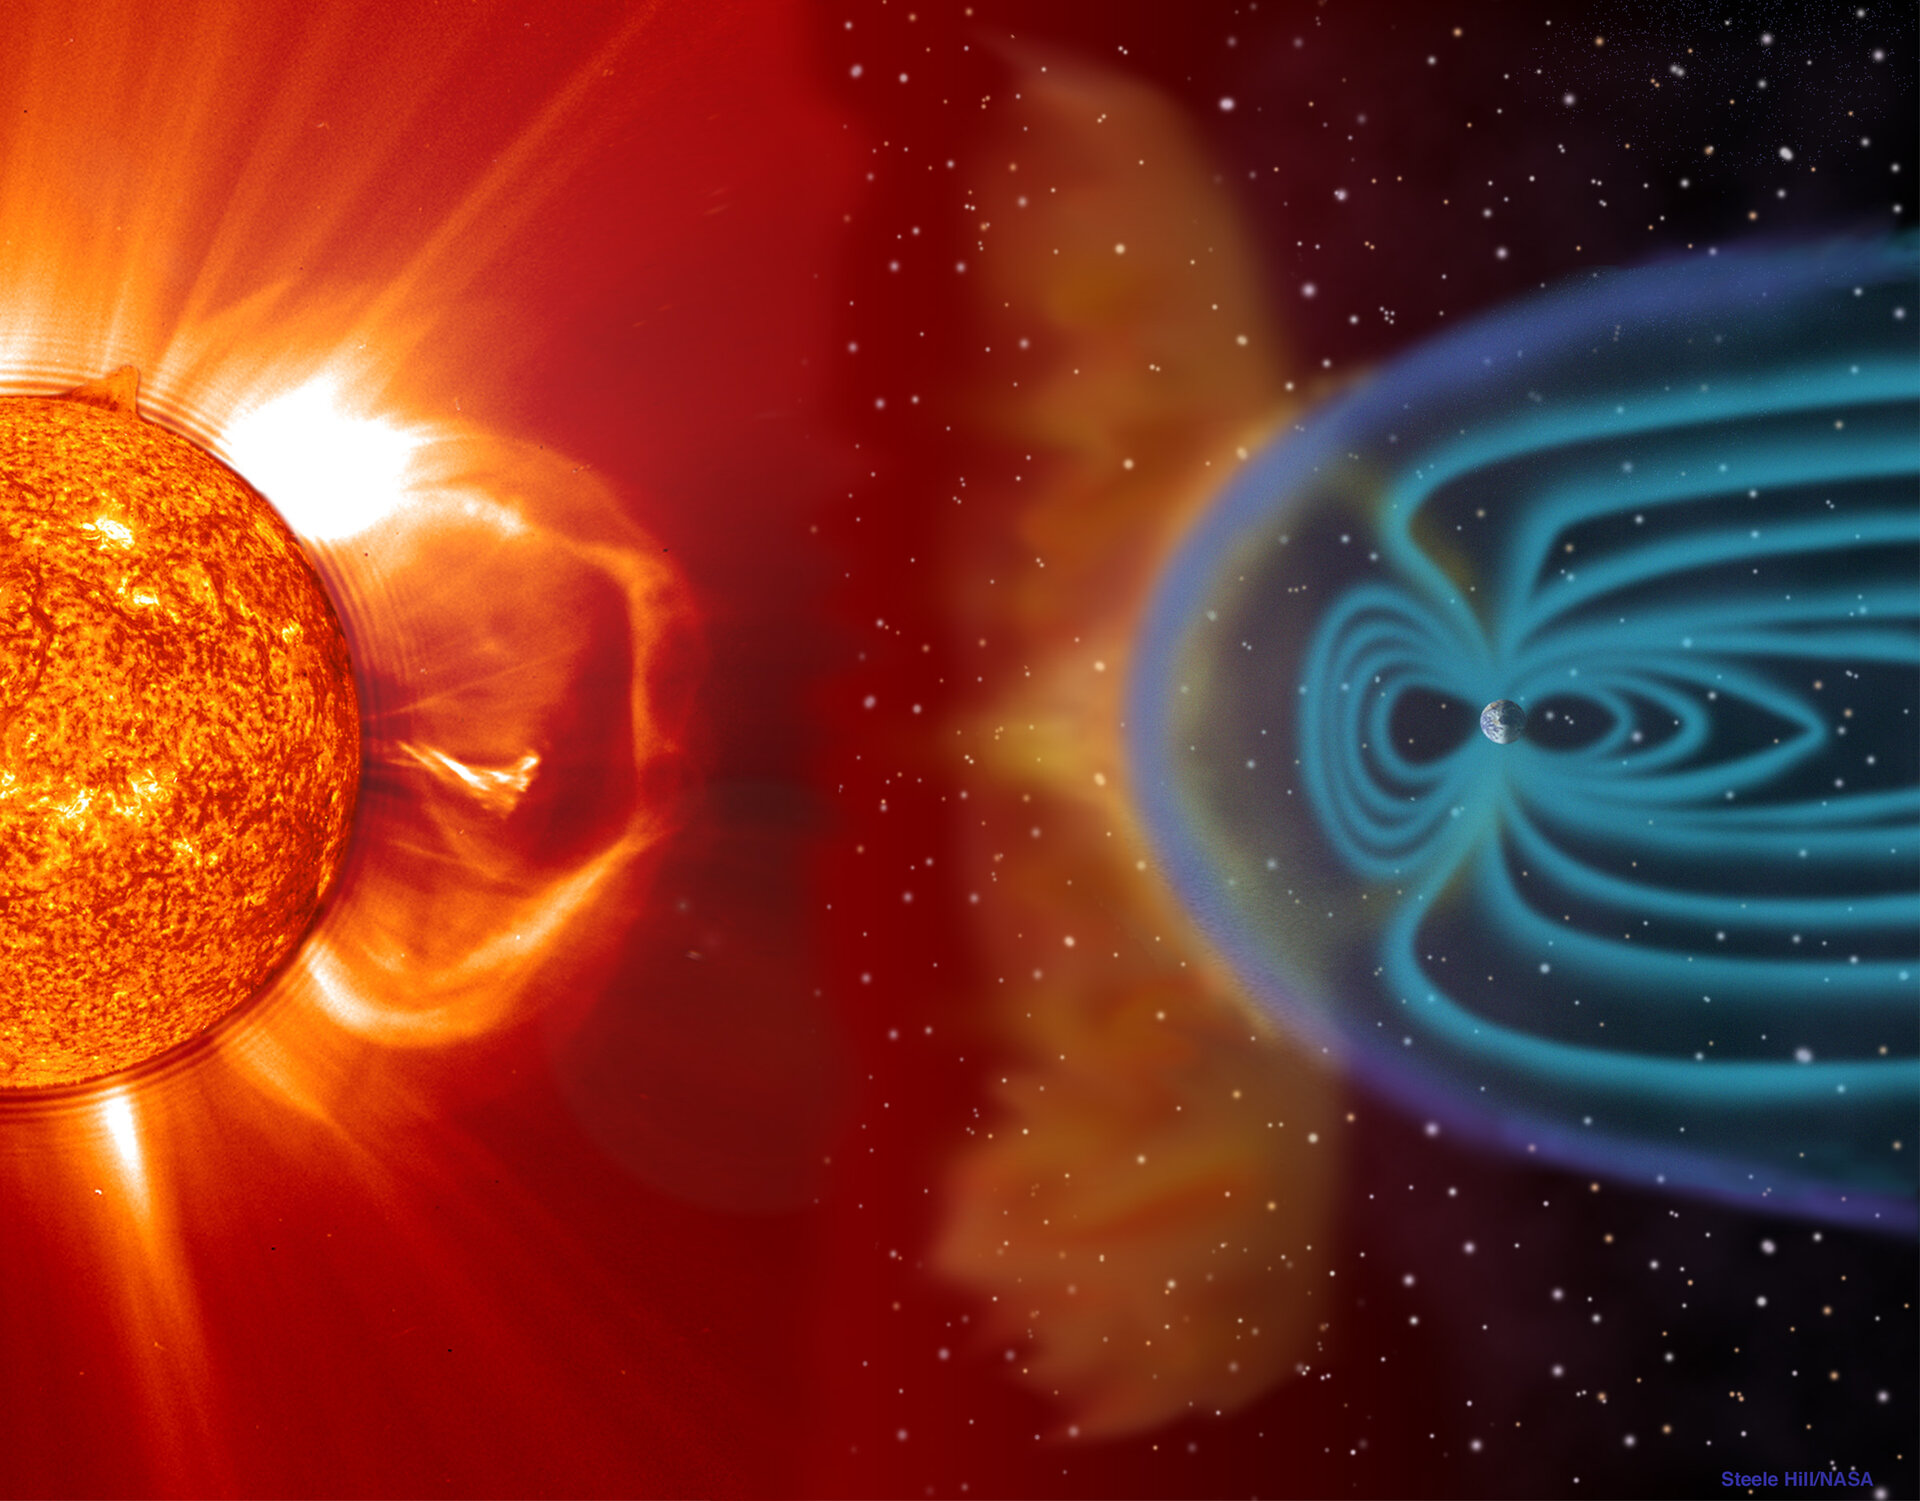 Solar storms sometimes reach Earth